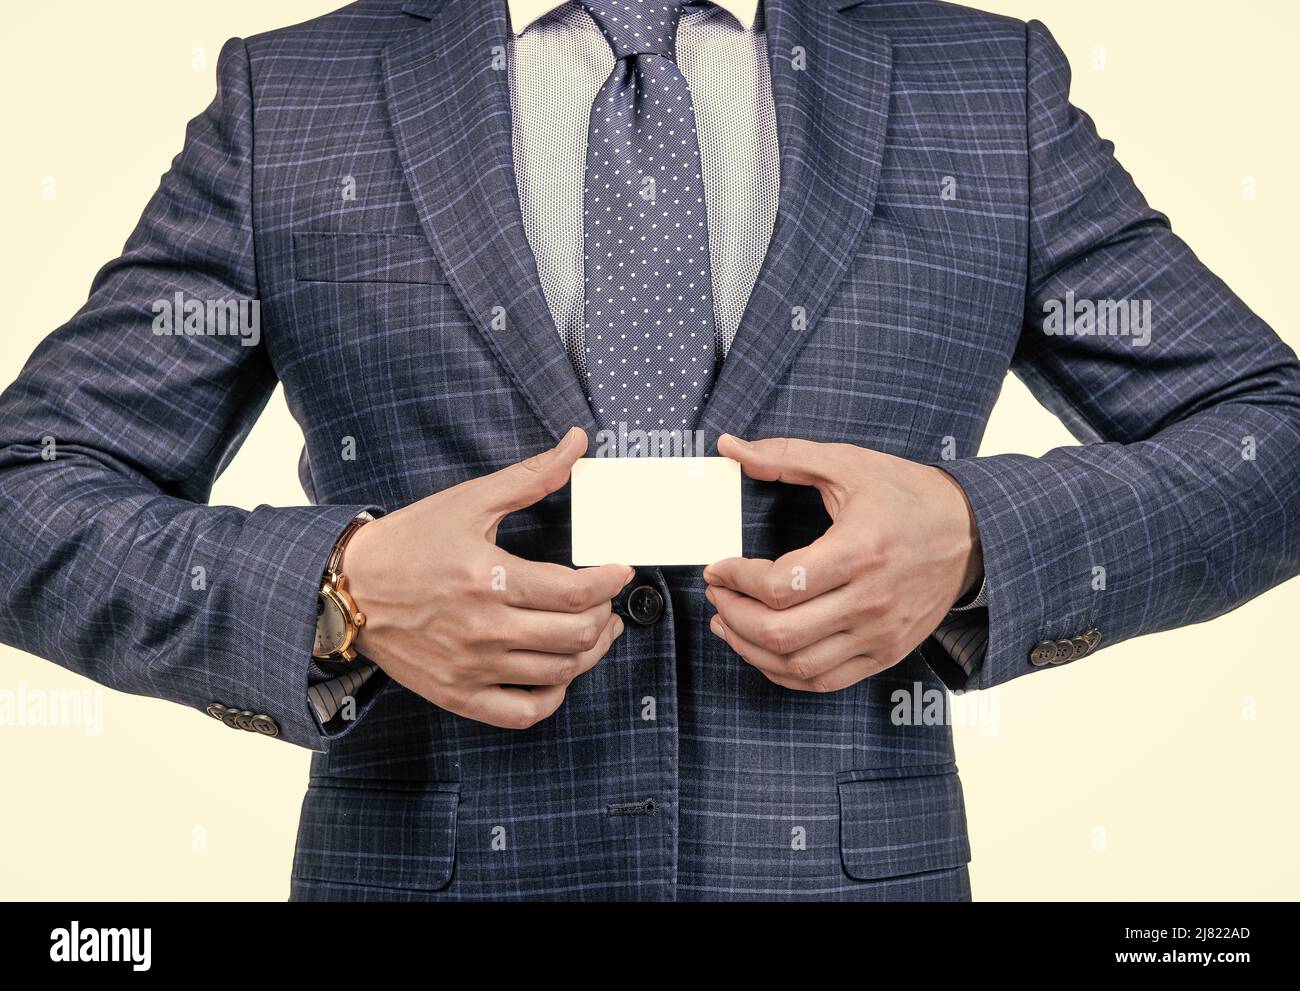 Smart business card etiquette. Empty card in male hands. Professional etiquette. Formal introduction Stock Photo